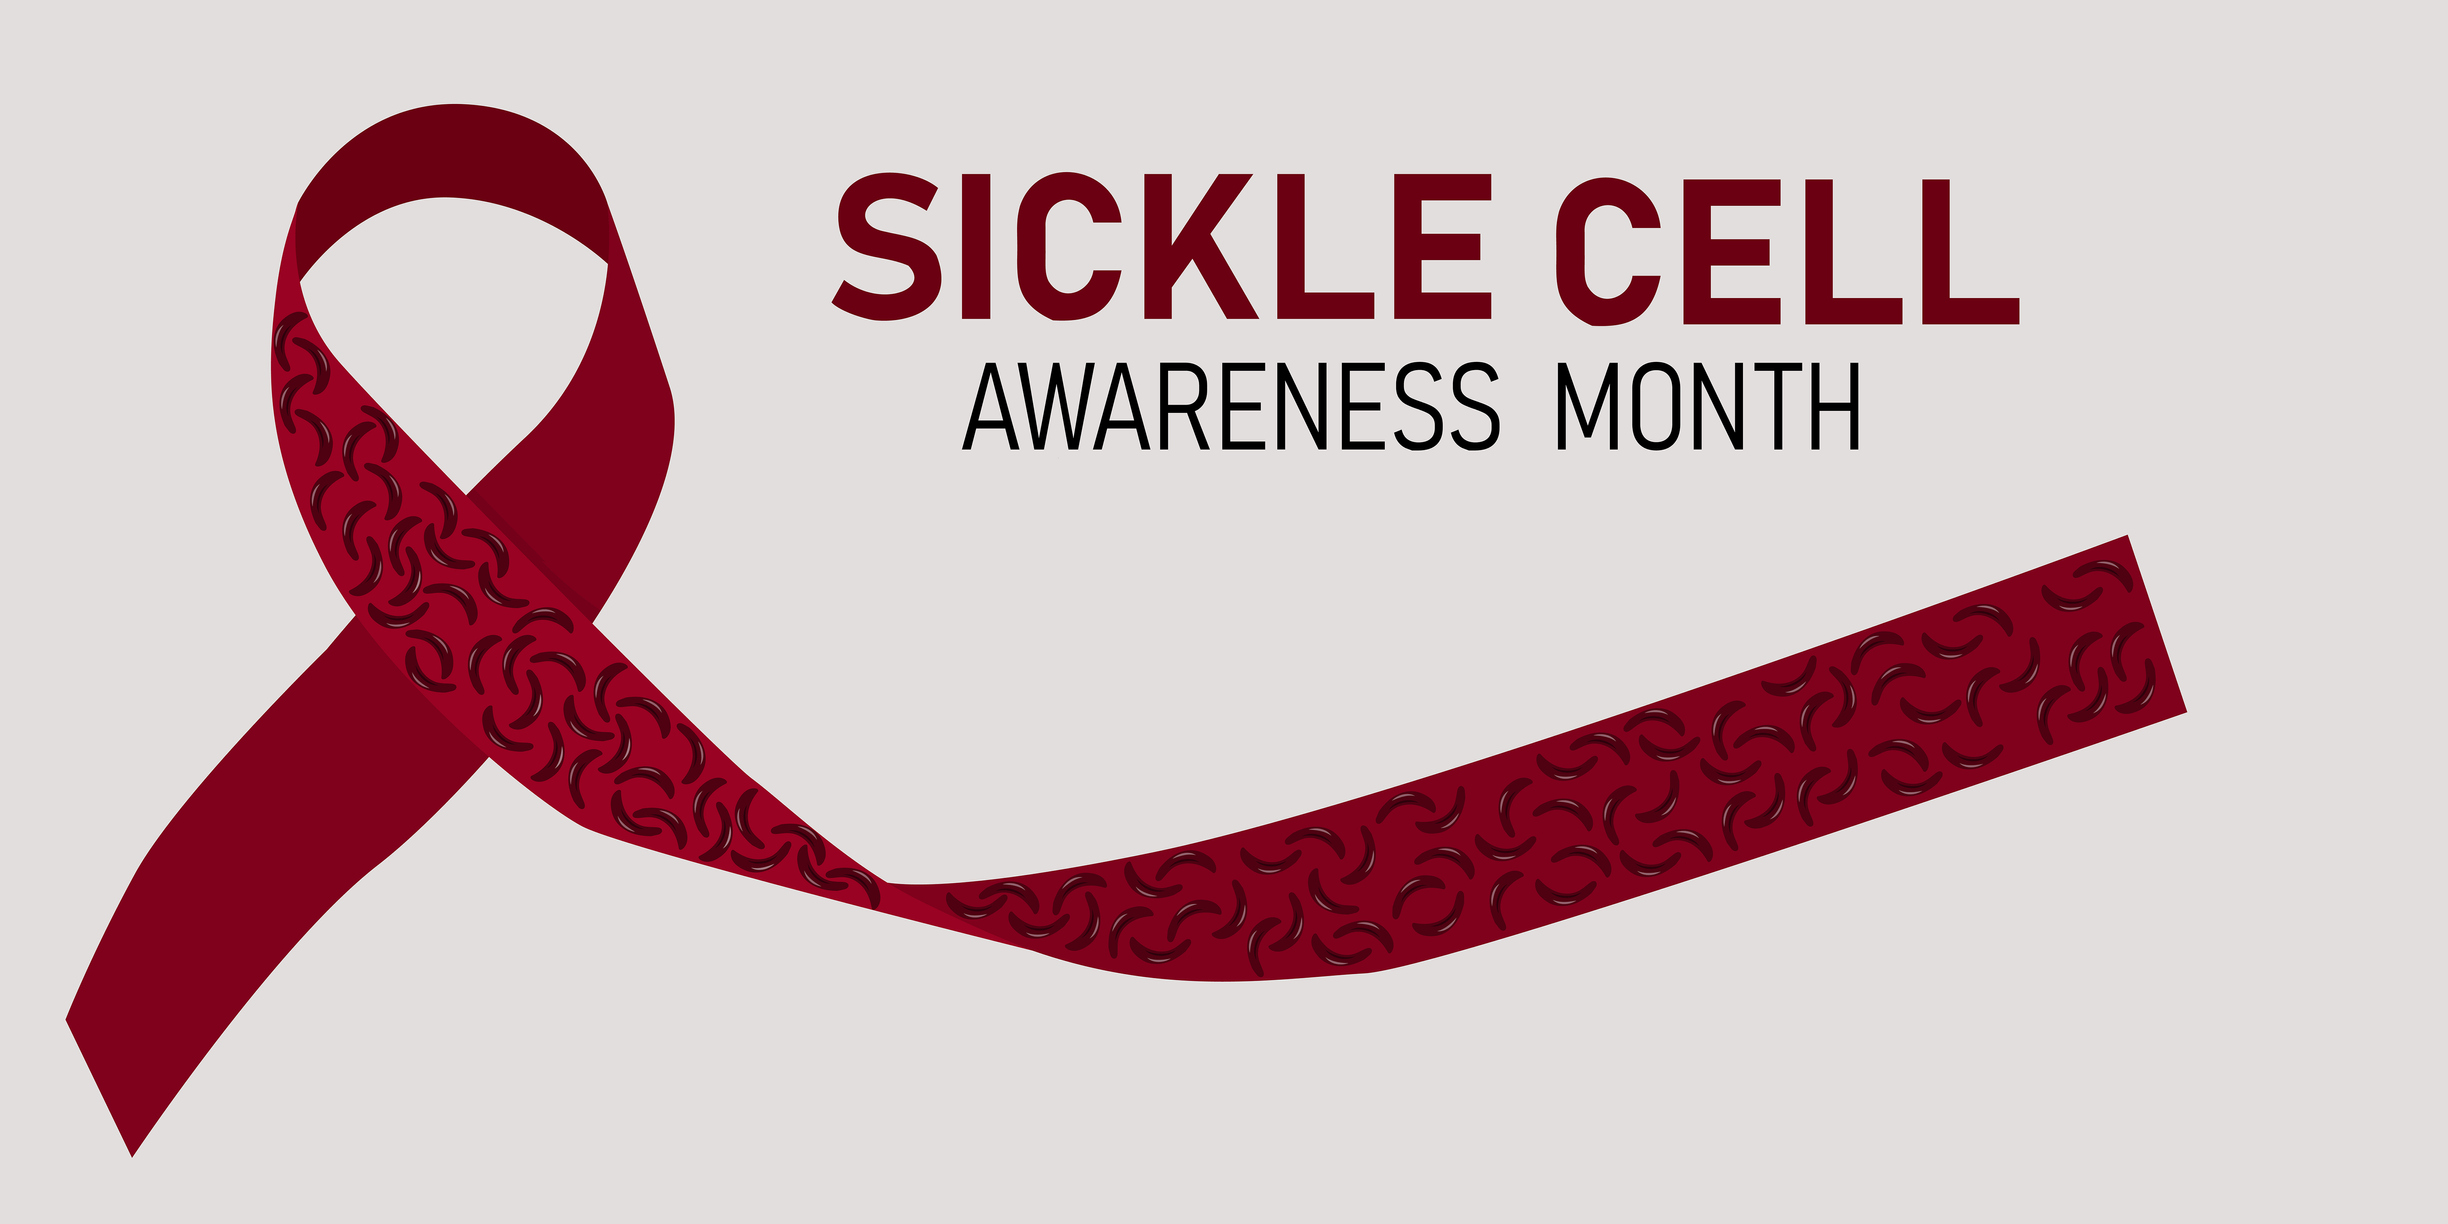 Blood donor diversity is crucial for helping sickle cell patients